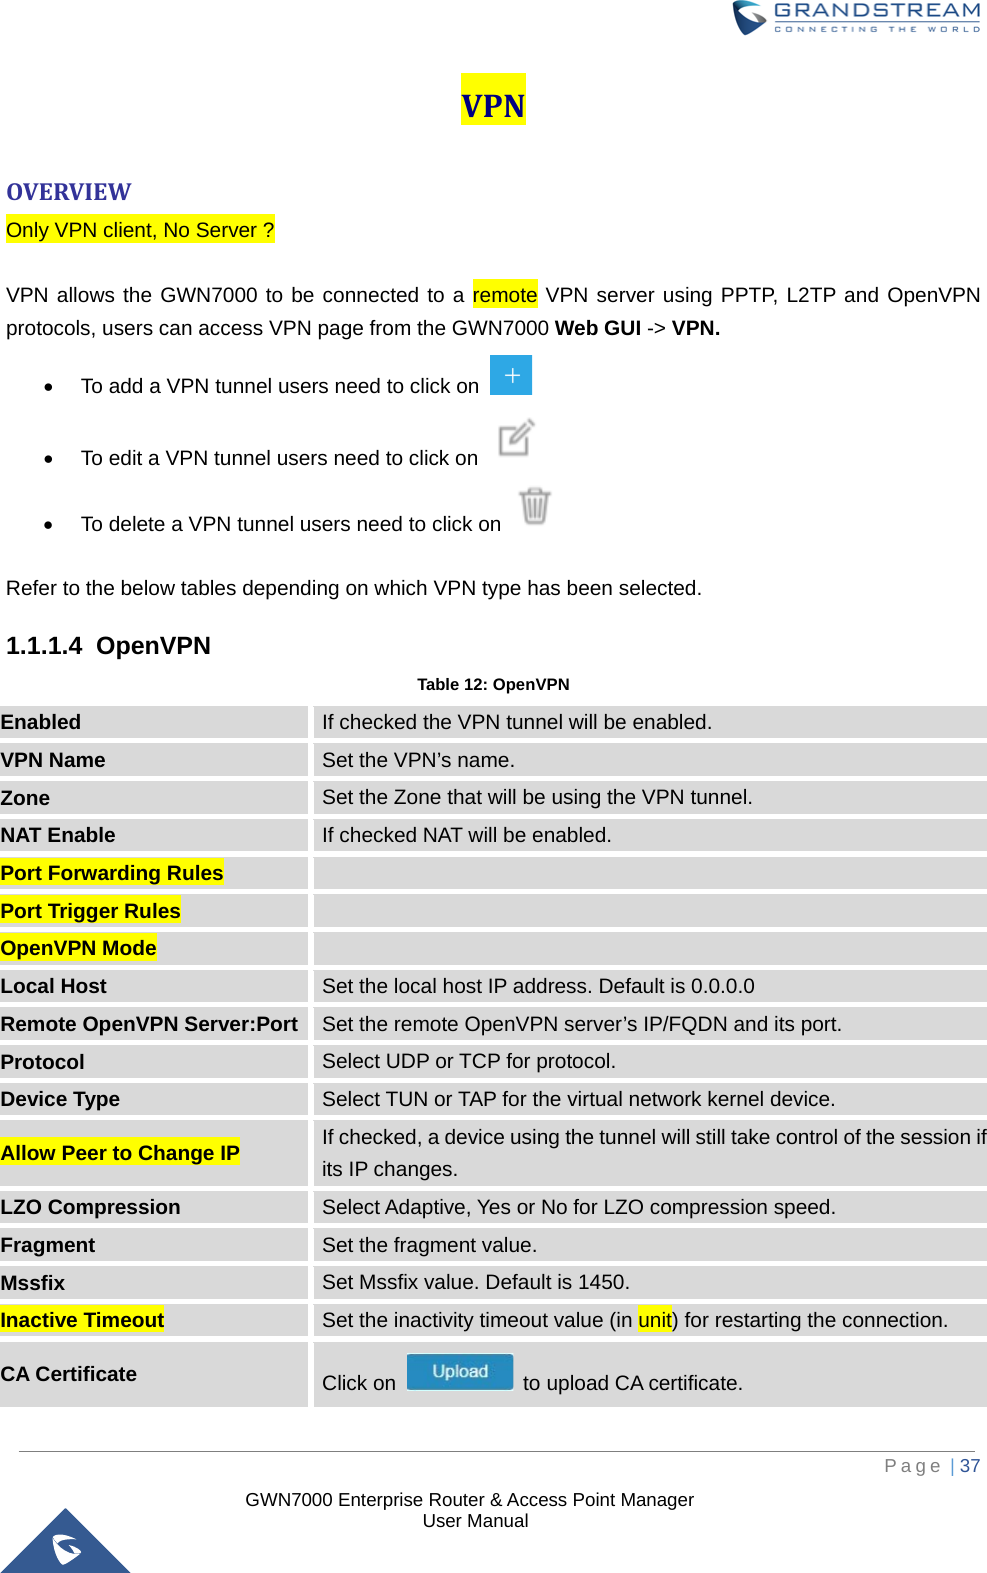  GWN7000 Enterprise Router &amp; Access Point Manager                    User Manual VPN OVERVIEW Only VPN client, No Server ?  VPN allows the GWN7000 to be connected to a remote VPN server using PPTP, L2TP and OpenVPN protocols, users can access VPN page from the GWN7000 Web GUI -&gt; VPN. • To add a VPN tunnel users need to click on   • To edit a VPN tunnel users need to click on   • To delete a VPN tunnel users need to click on    Refer to the below tables depending on which VPN type has been selected. 1.1.1.4  OpenVPN Table 12: OpenVPN Enabled If checked the VPN tunnel will be enabled. VPN Name Set the VPN’s name. Zone Set the Zone that will be using the VPN tunnel. NAT Enable If checked NAT will be enabled. Port Forwarding Rules  Port Trigger Rules  OpenVPN Mode  Local Host Set the local host IP address. Default is 0.0.0.0 Remote OpenVPN Server:Port Set the remote OpenVPN server’s IP/FQDN and its port. Protocol  Select UDP or TCP for protocol. Device Type Select TUN or TAP for the virtual network kernel device. Allow Peer to Change IP If checked, a device using the tunnel will still take control of the session if its IP changes. LZO Compression Select Adaptive, Yes or No for LZO compression speed. Fragment  Set the fragment value. Mssfix Set Mssfix value. Default is 1450. Inactive Timeout Set the inactivity timeout value (in unit) for restarting the connection. CA Certificate Click on   to upload CA certificate.     Page | 37     